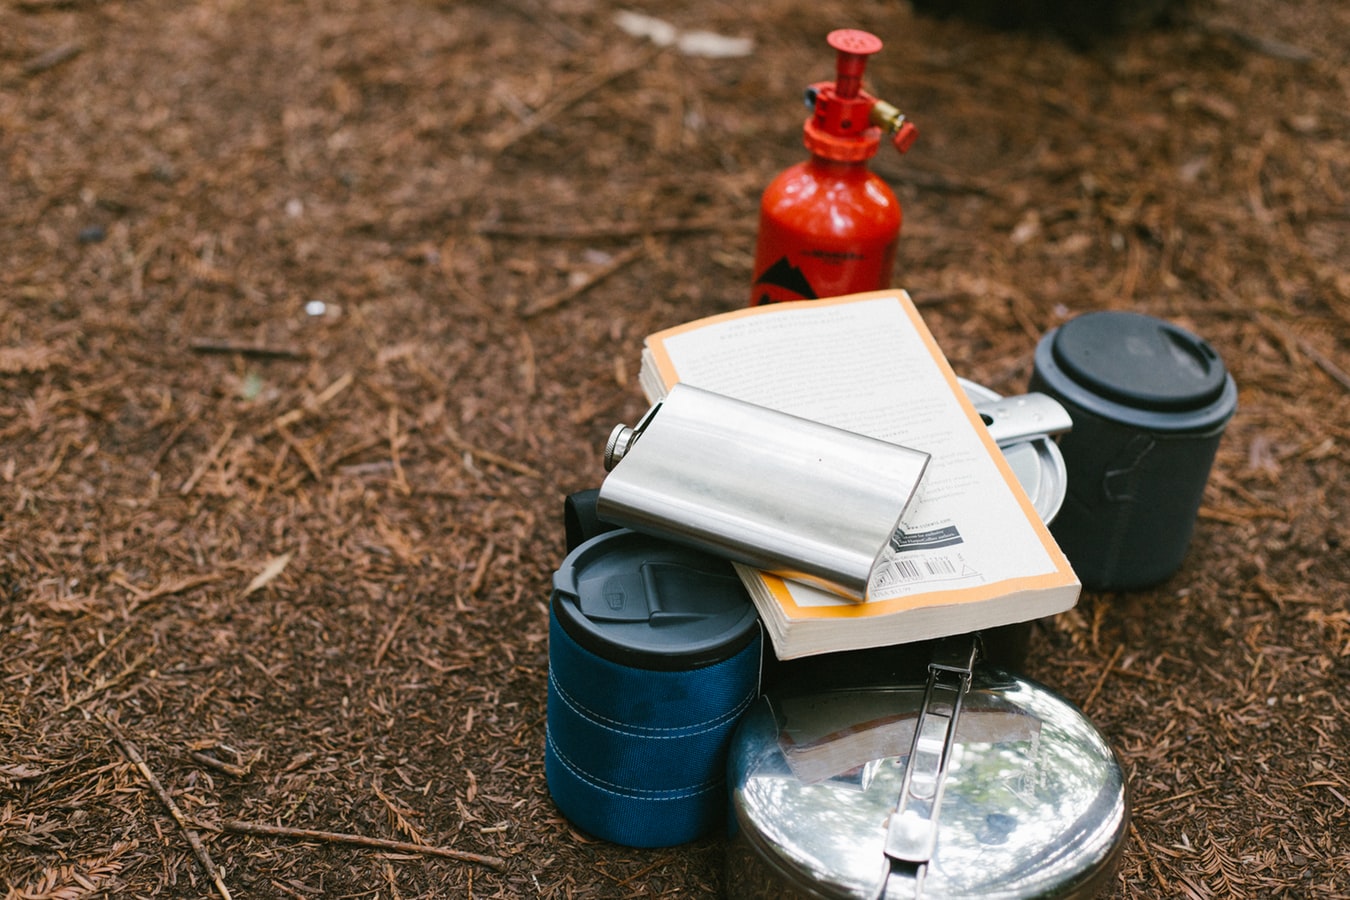 Packed belongings for a camping trip. Kettle, thermos and fire safety equipment.